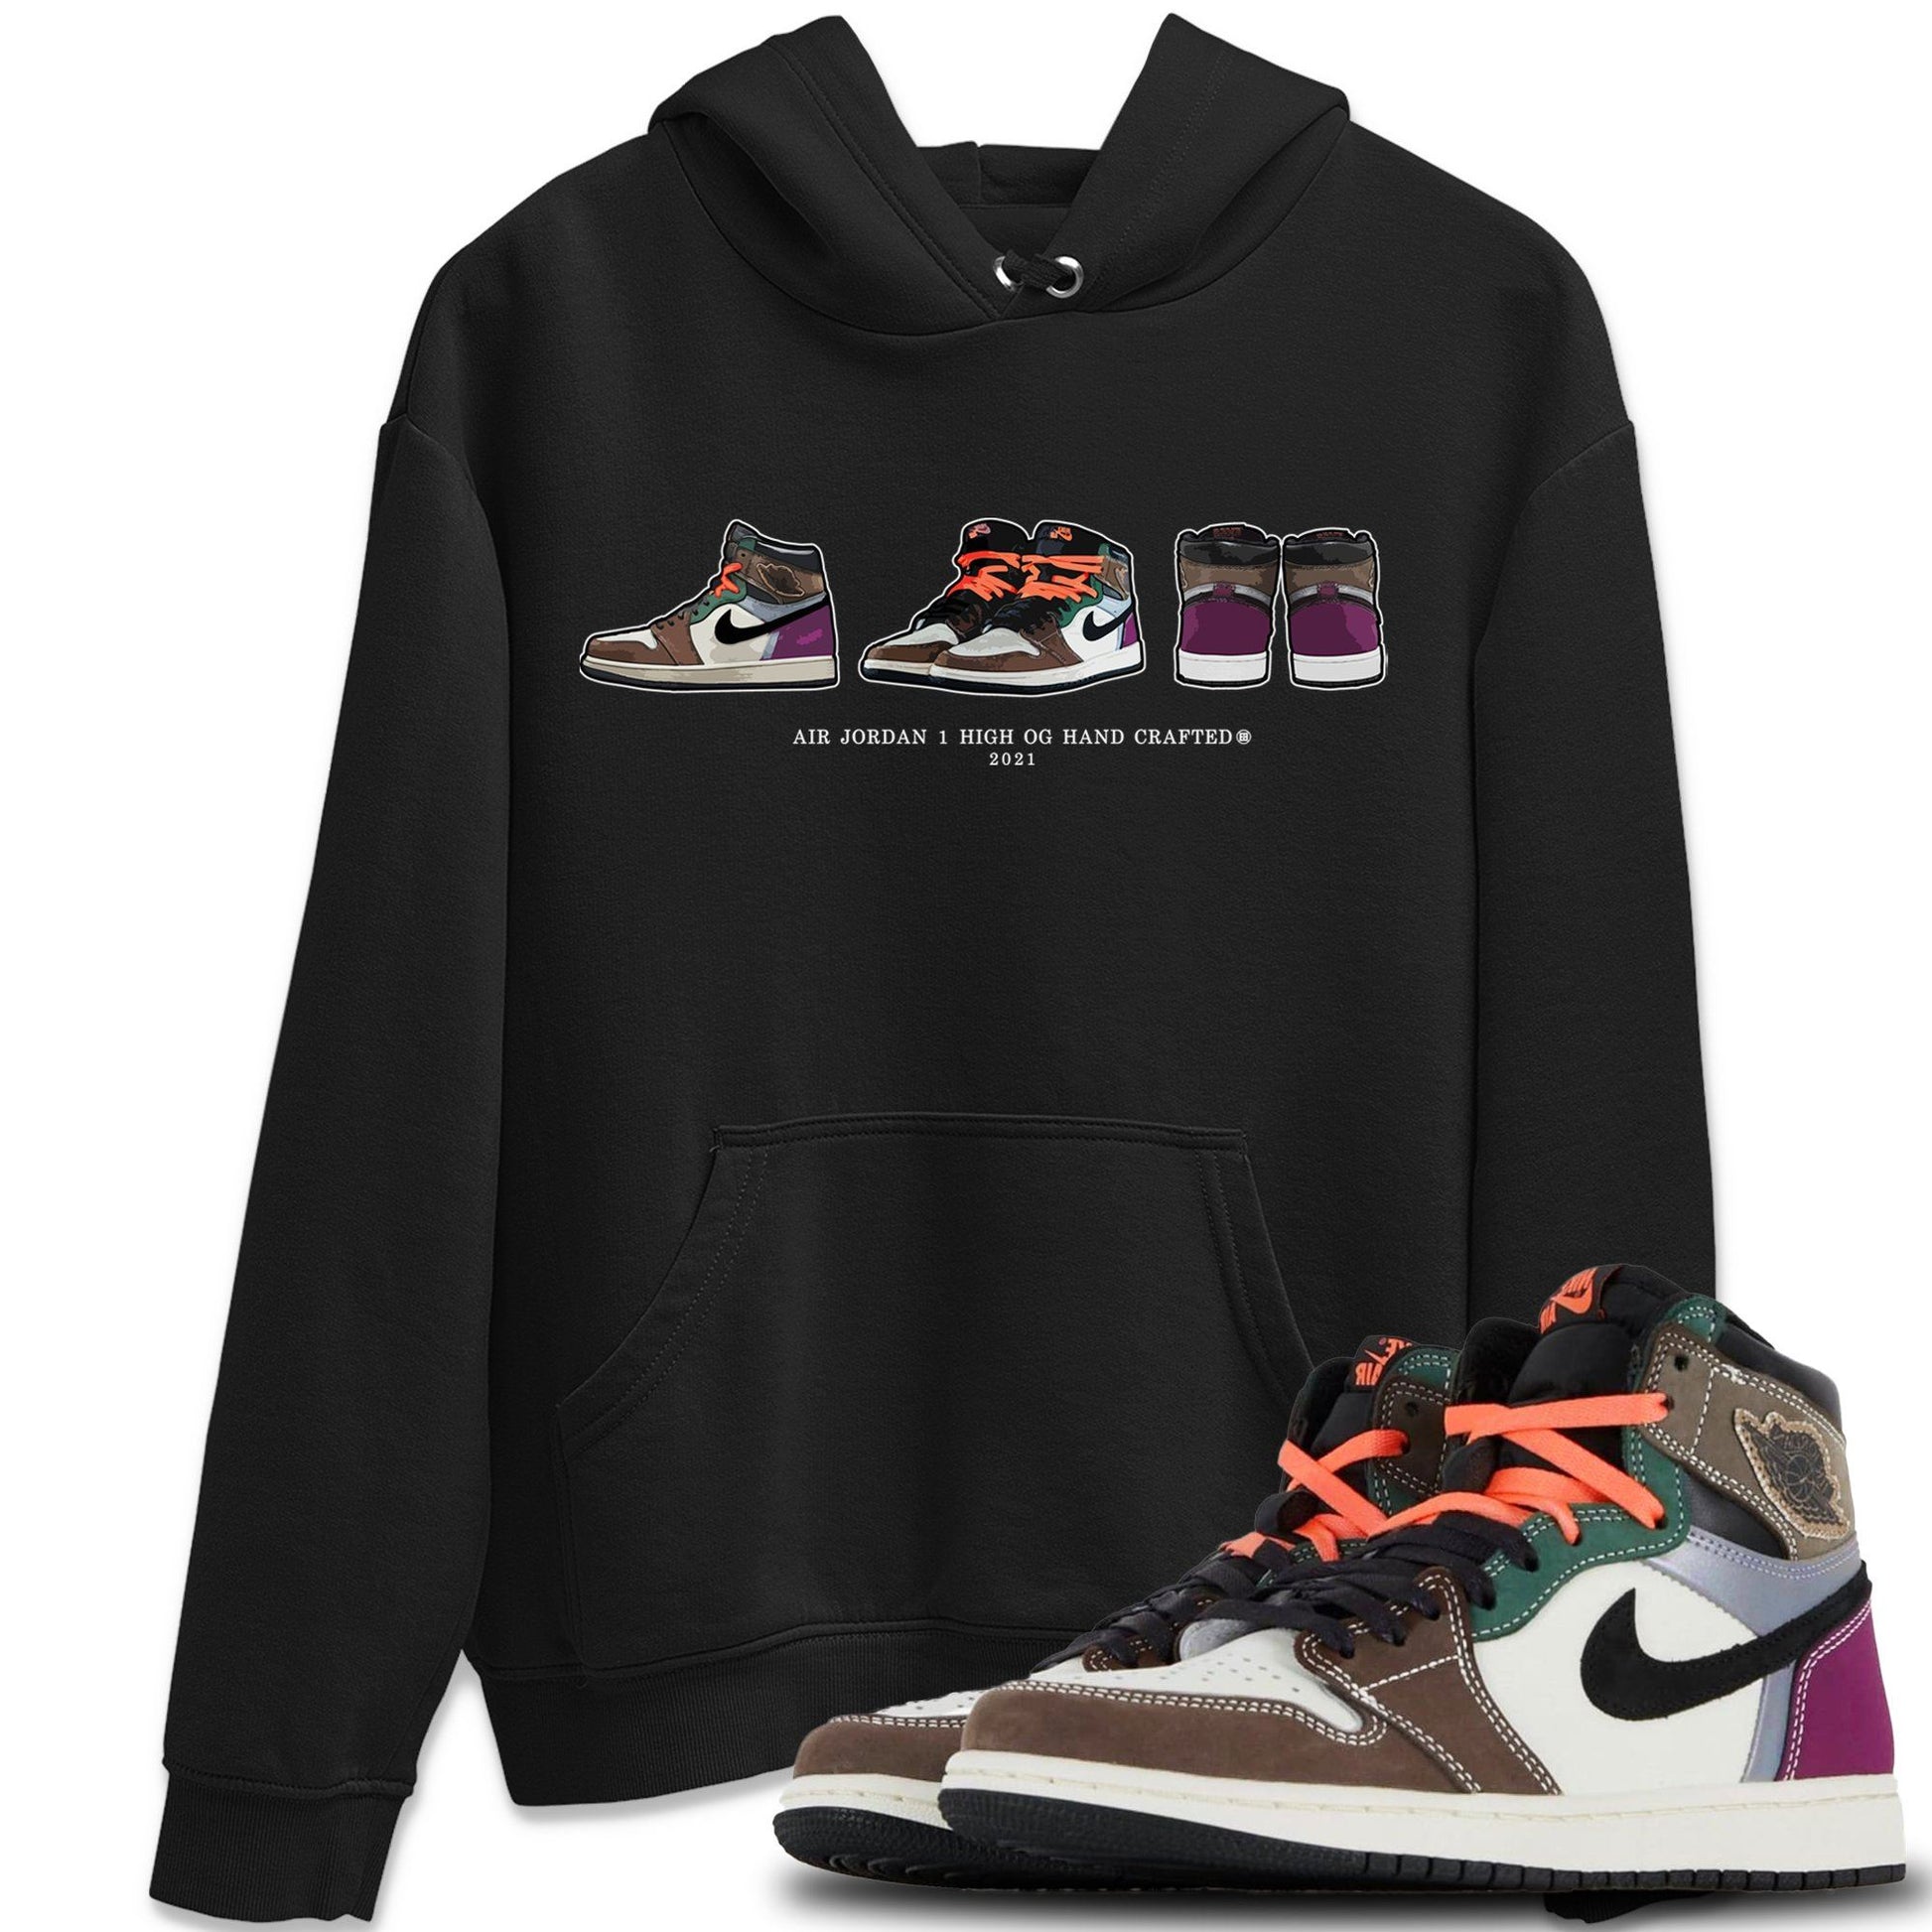 Jordan 1 Hand Crafted Sneaker Match Tees Air Jordan 1 Prelude Sneaker Tees Jordan 1 Hand Crafted Sneaker Release Tees Unisex Shirts